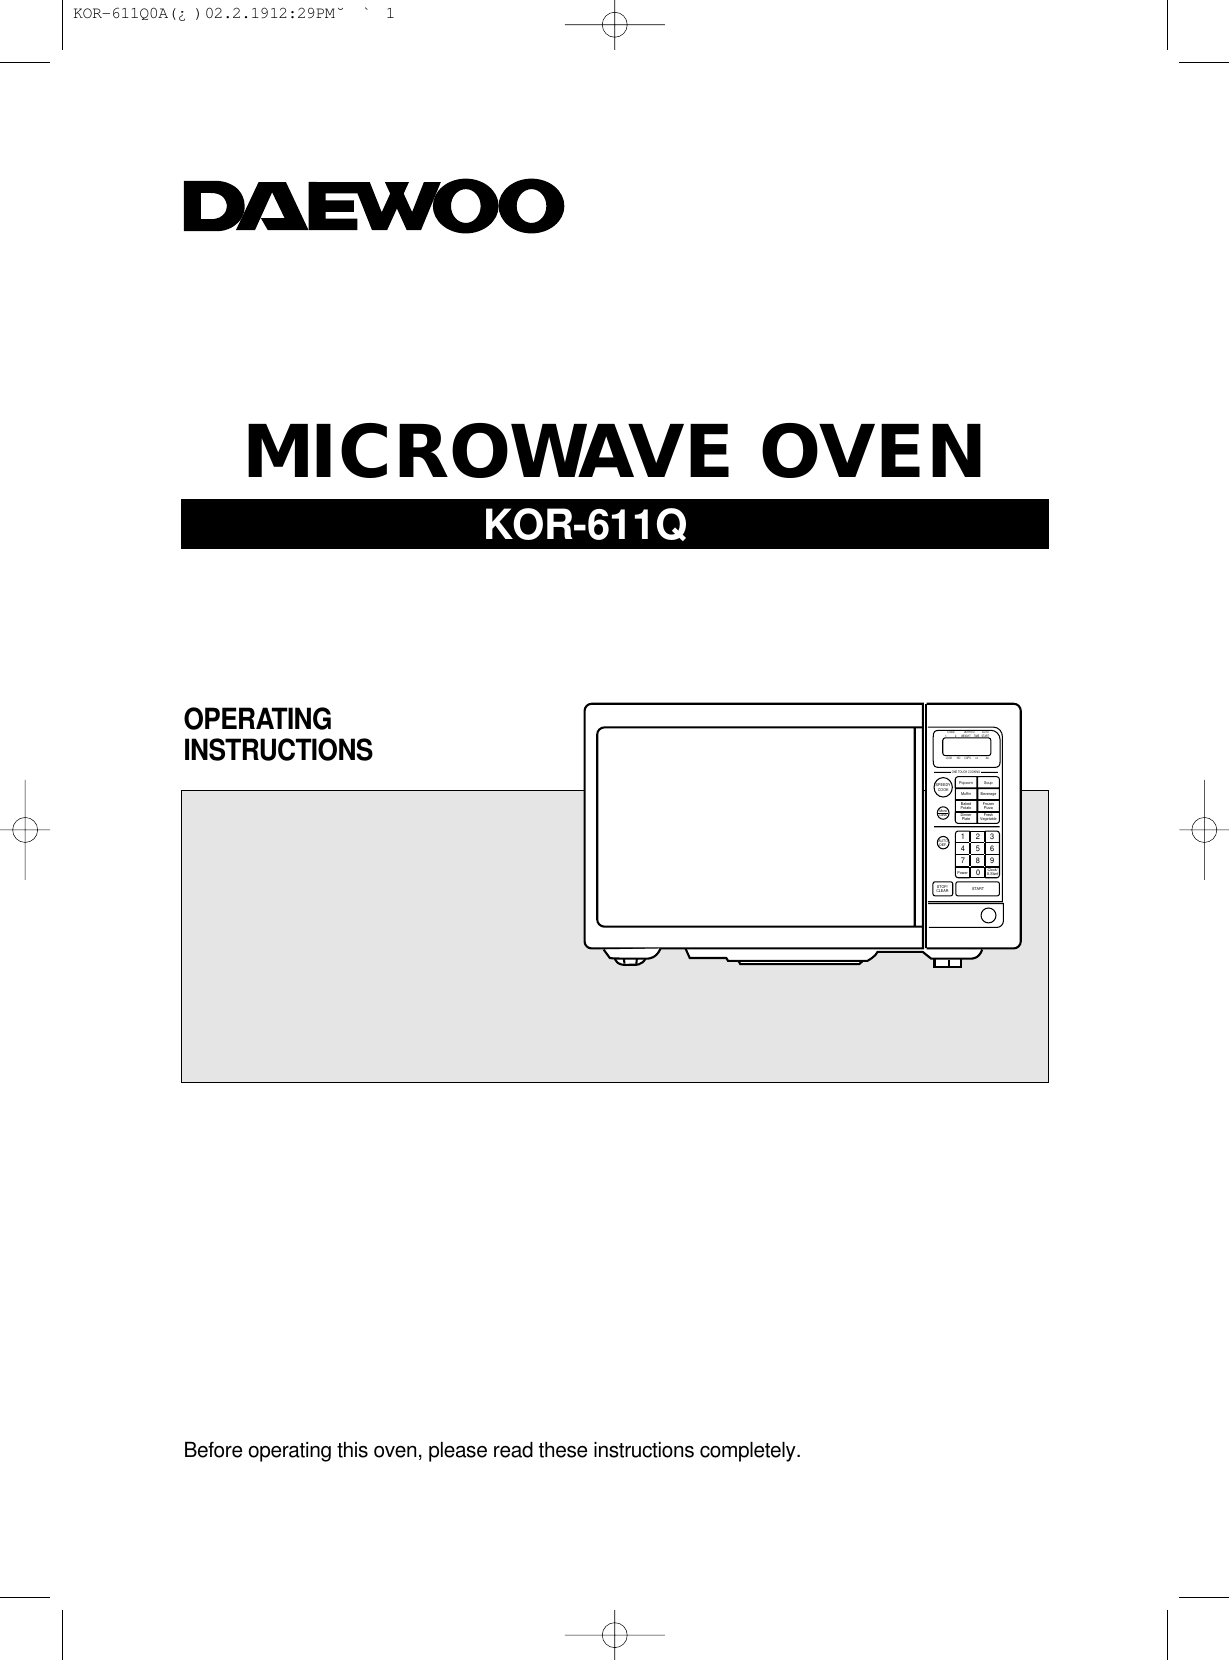 Before operating this oven, please read these instructions completely.OPERATINGINSTRUCTIONSMICROWAVE OVENSTAGE DEFROST AUTOSTART12WEIGHT TIMELOCK       NO      CUPS       oz            lbsPopcornMuffinBakedPotatoDinnerPlatePower Clock/A.StartSoupBeverageFrozenPizzaFreshVegetableSPEEDYCOOKMoreLessAUTODEF.STOP/CLEAR START1     2     34     5     67     8     90ONE TOUCH COOKINGKOR-611Q KOR-611Q0A(¿ )  02.2.19 12:29 PM  ˘`1